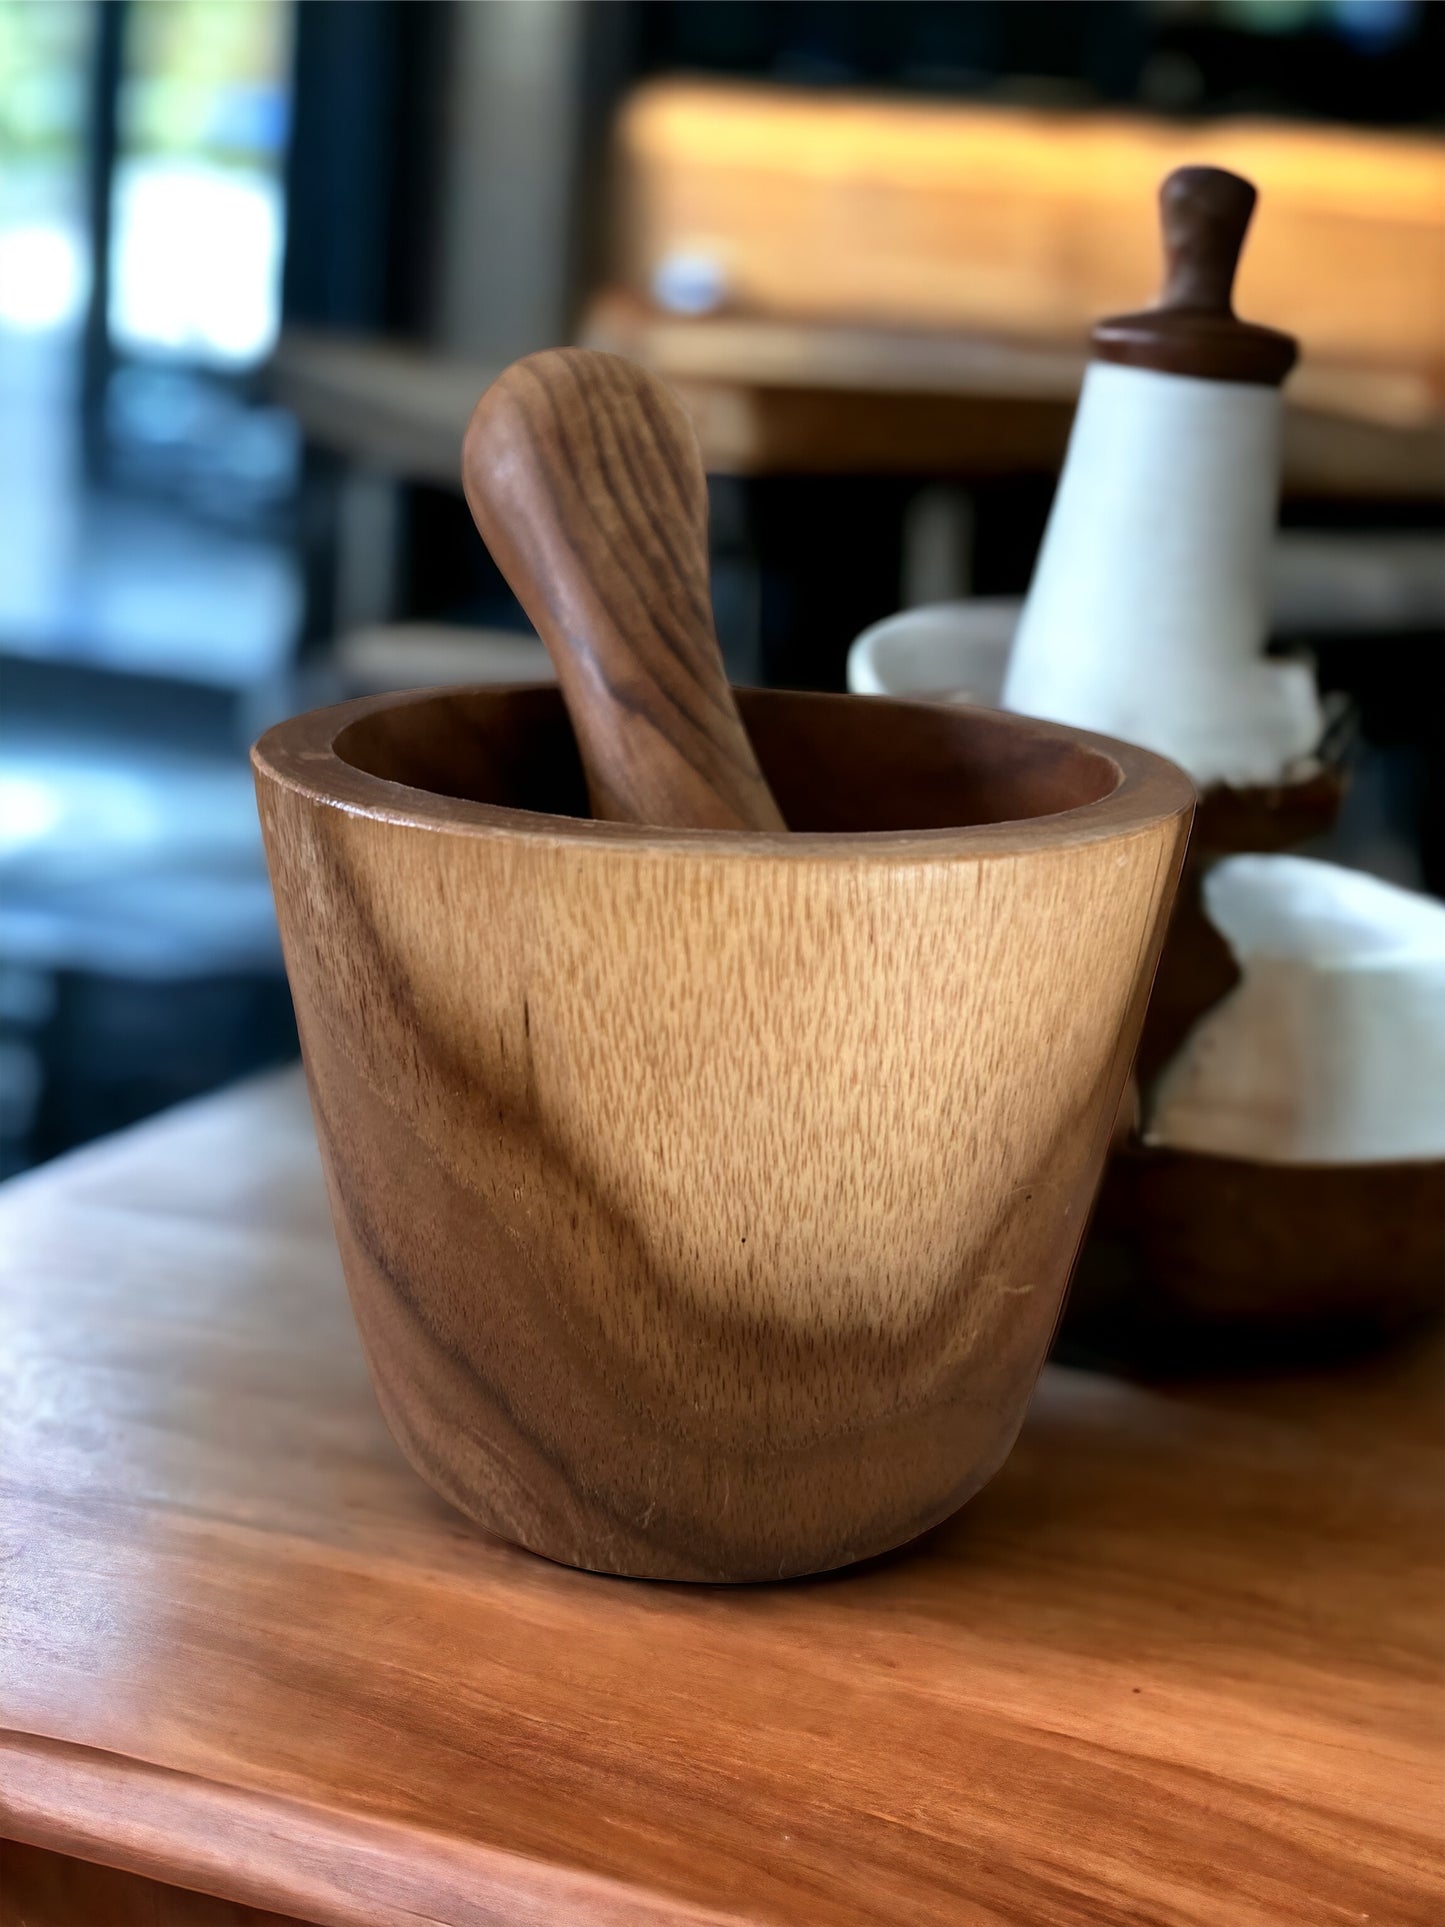  the natural elegance, efficient grinding capabilities, versatile use, easy maintenance, and sustainability of the teak wood mortar and pestle while emphasizing its role as a timeless kitchen essential.